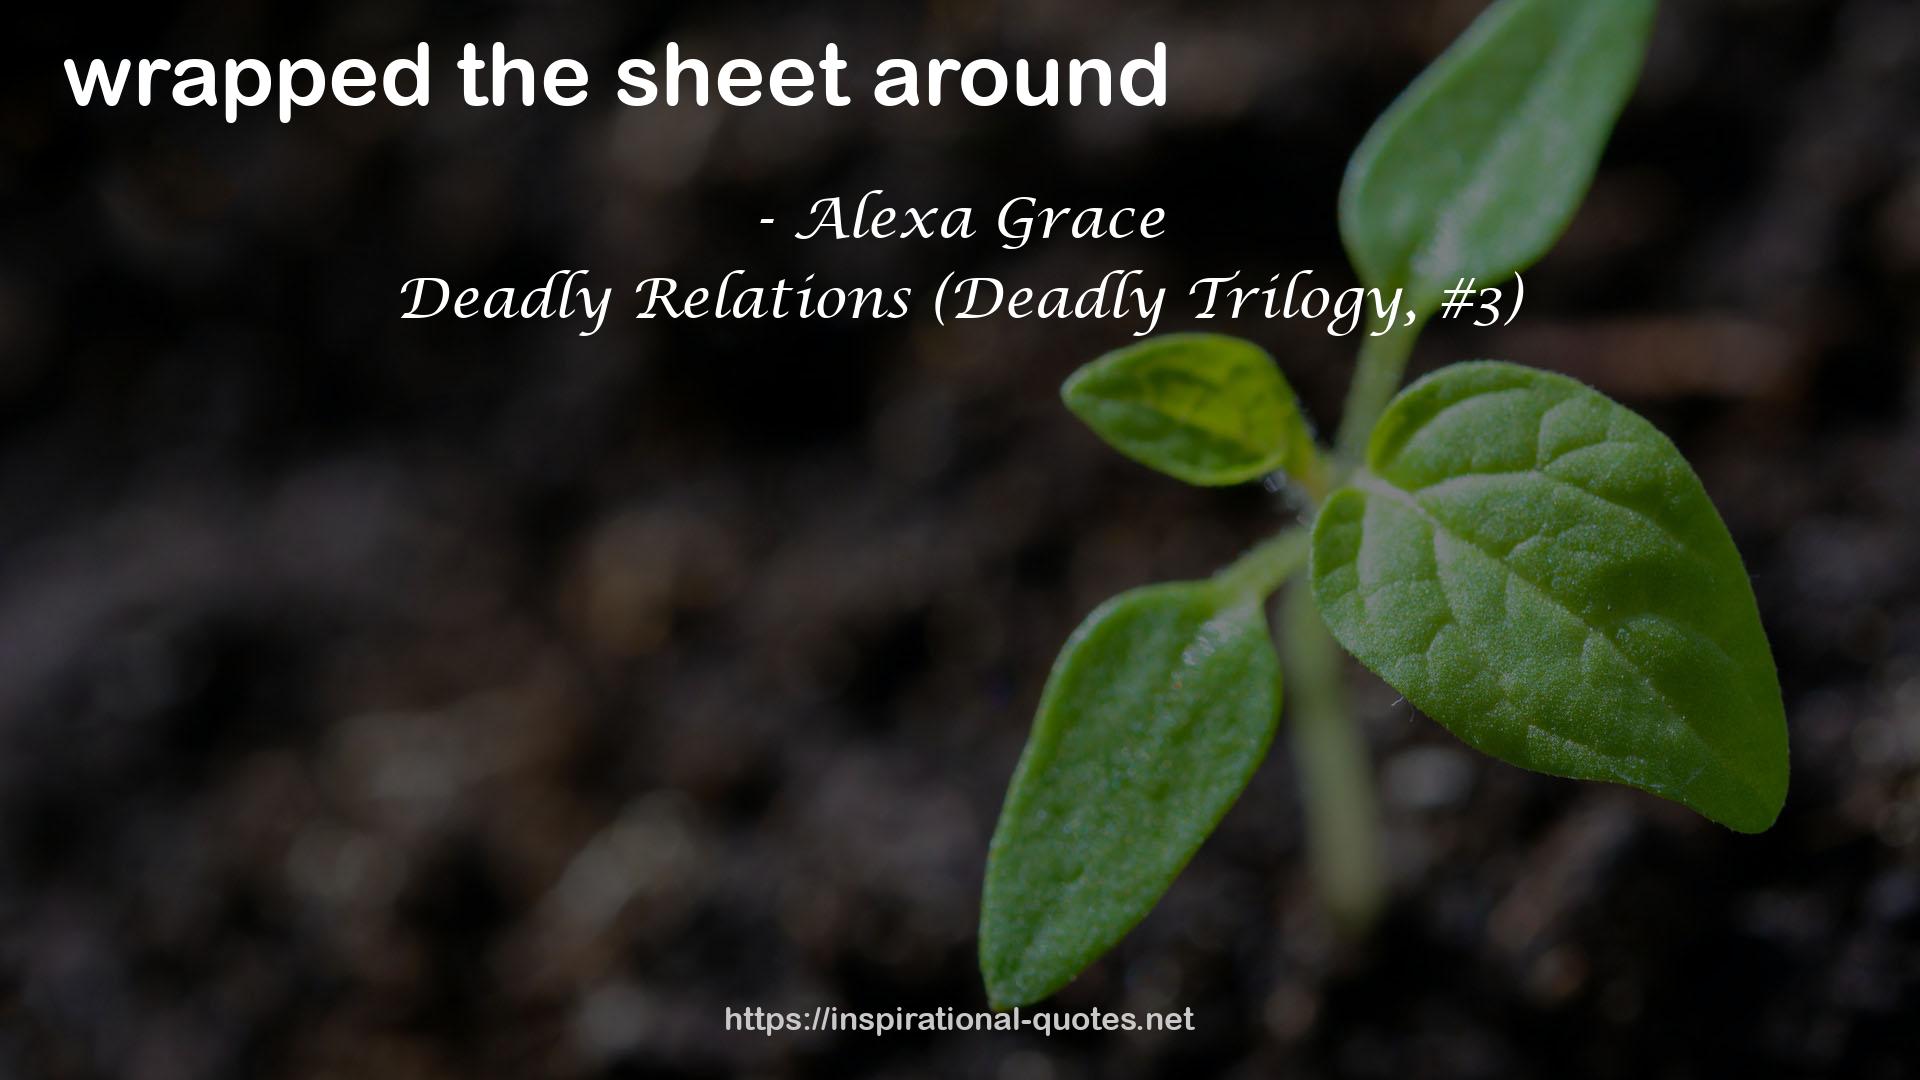 Deadly Relations (Deadly Trilogy, #3) QUOTES